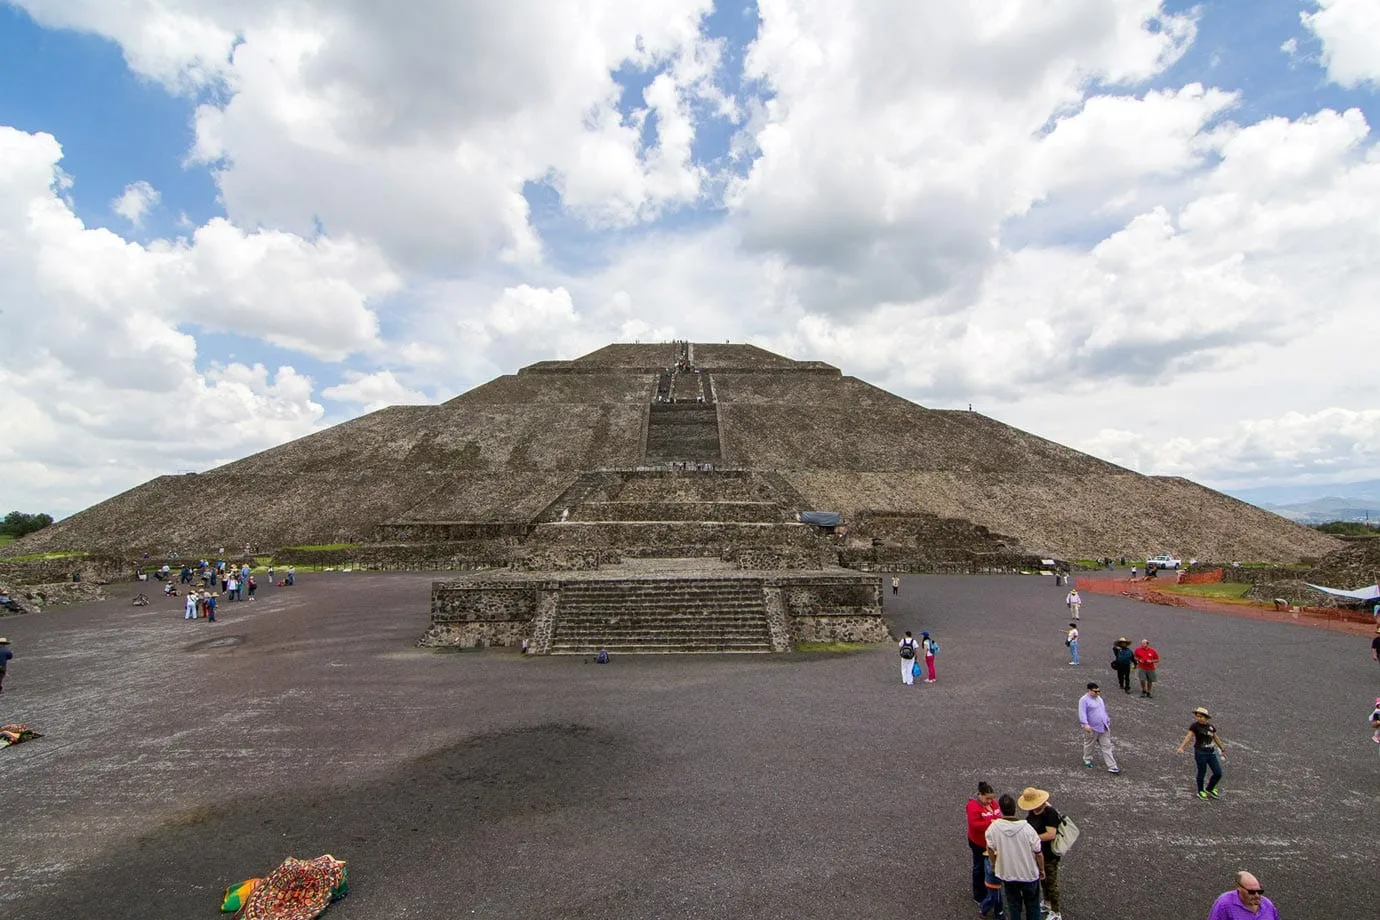 The Pyramid of the Sun is the largest and most impressive in Teotihuacan and it is the third largest pyramid in the world